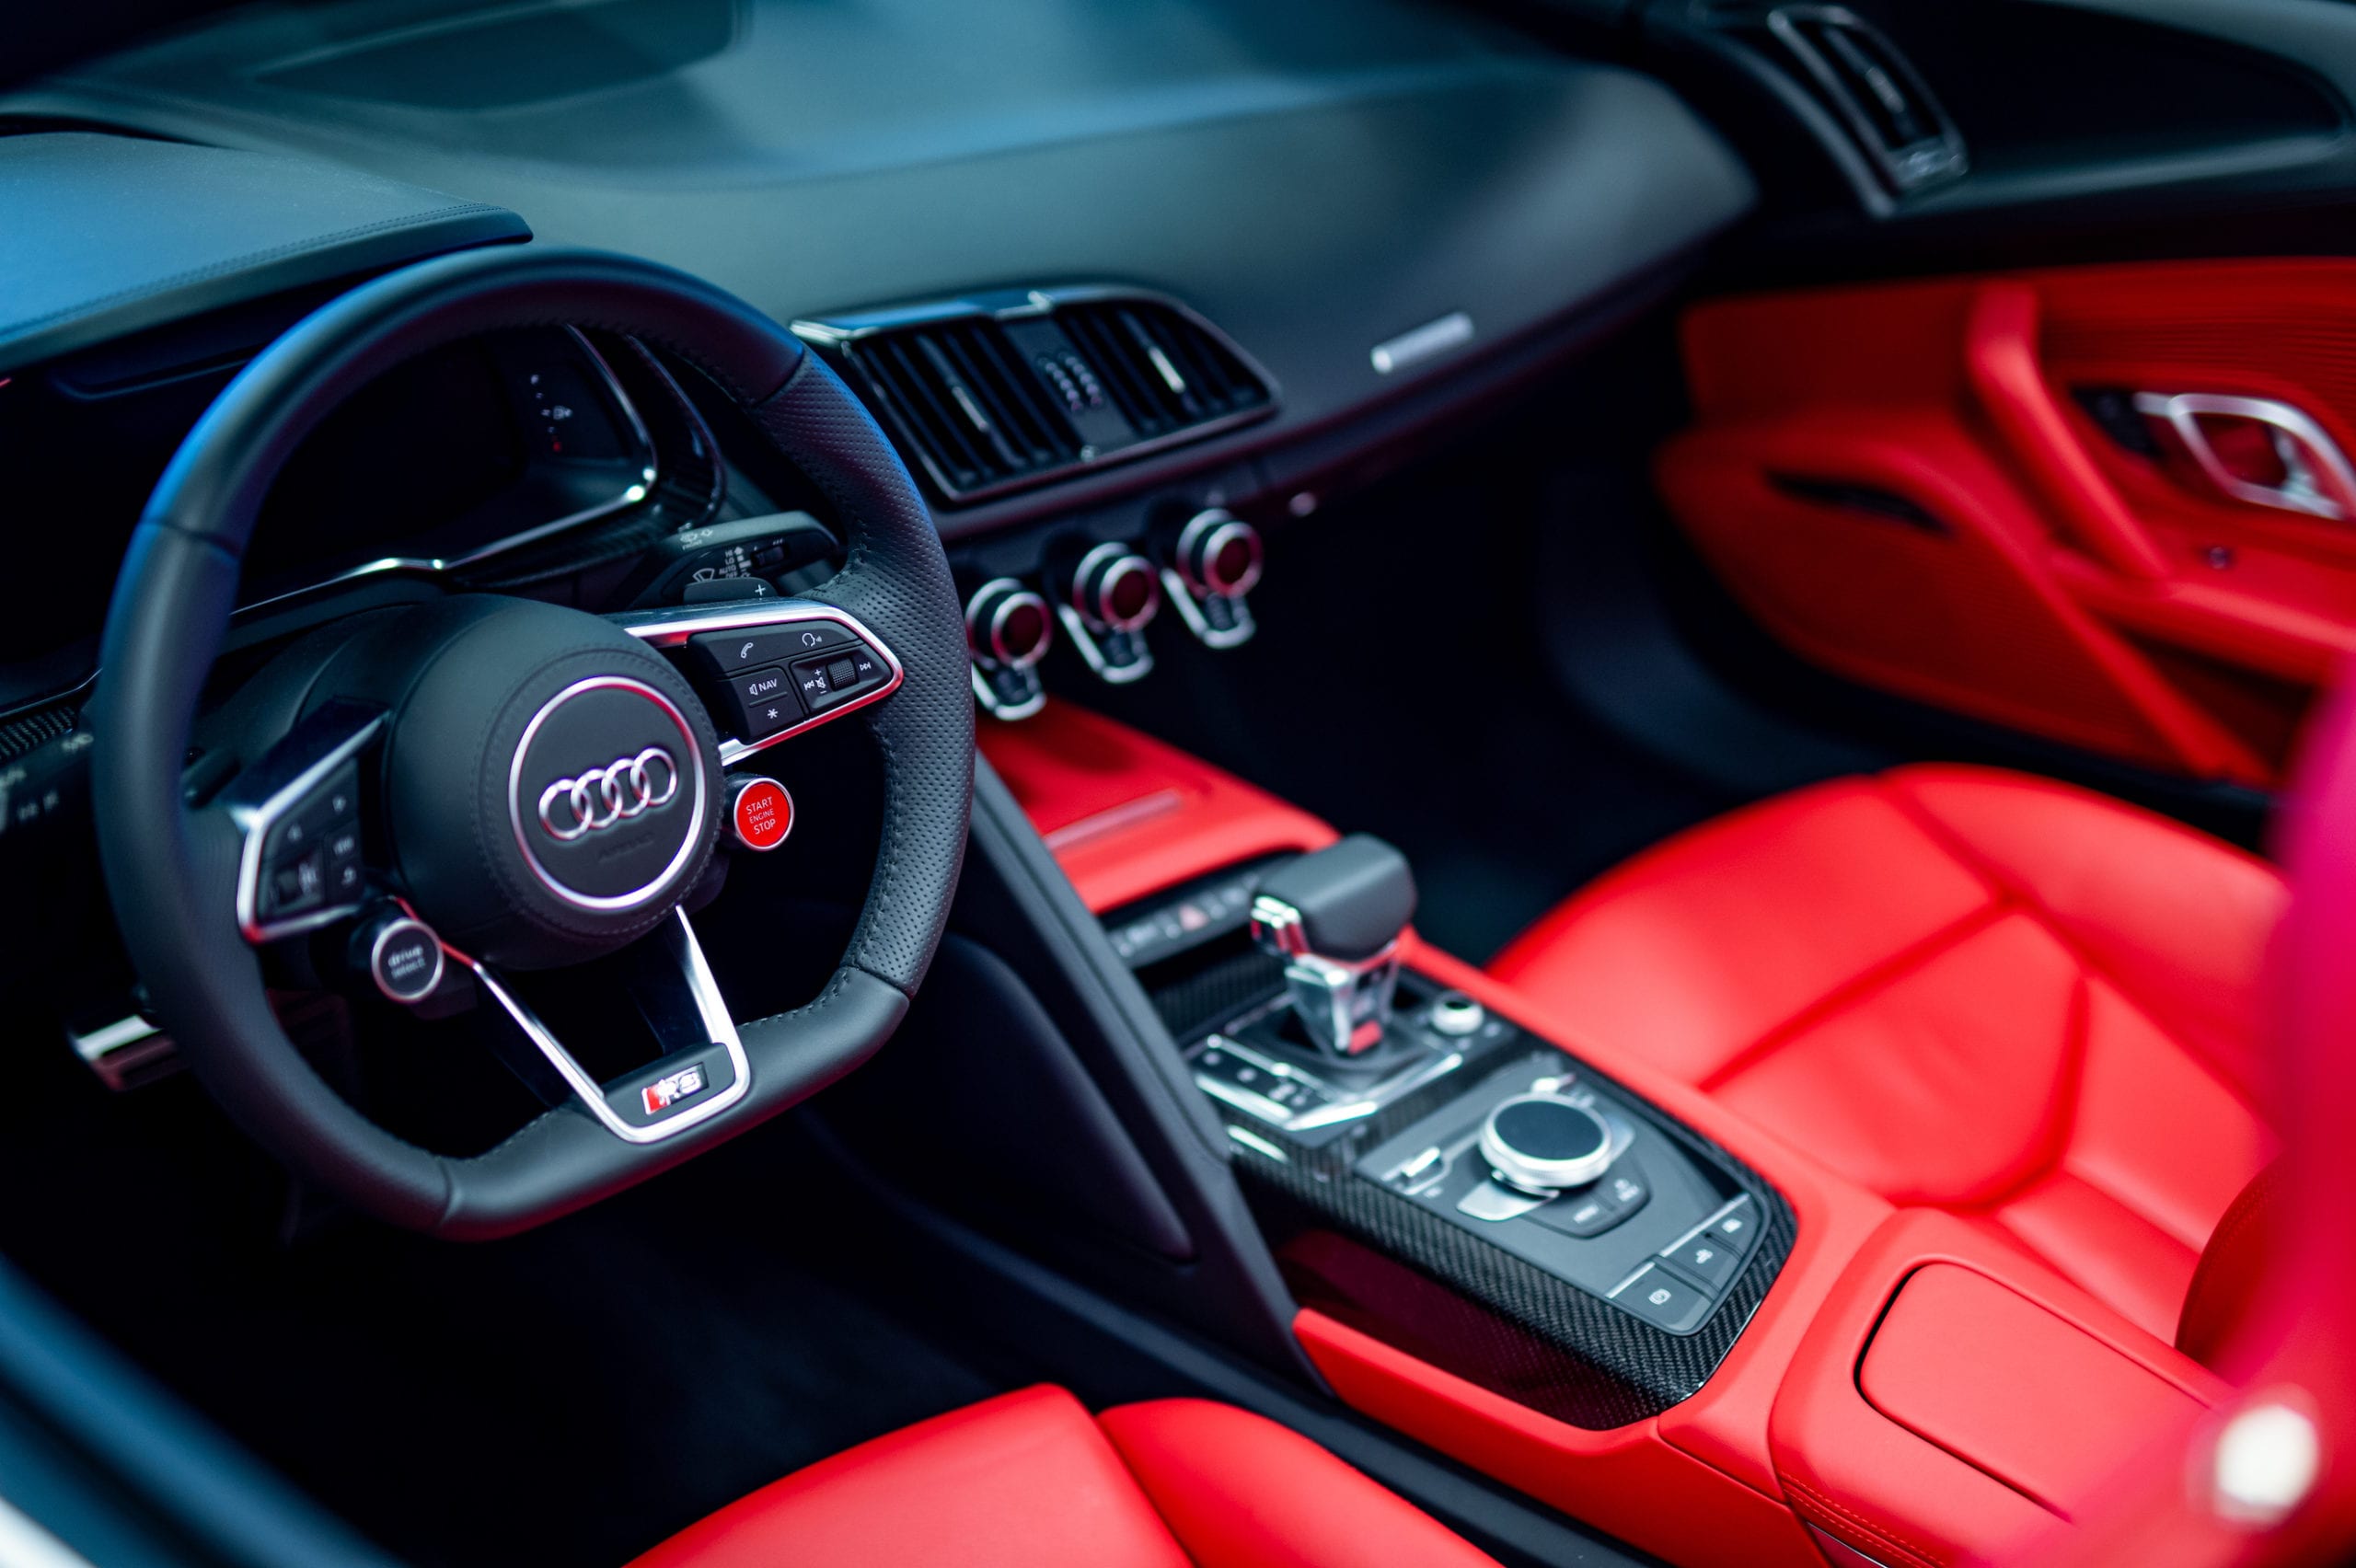 Car Offer Interior view of a luxury Audi car with red leather seats